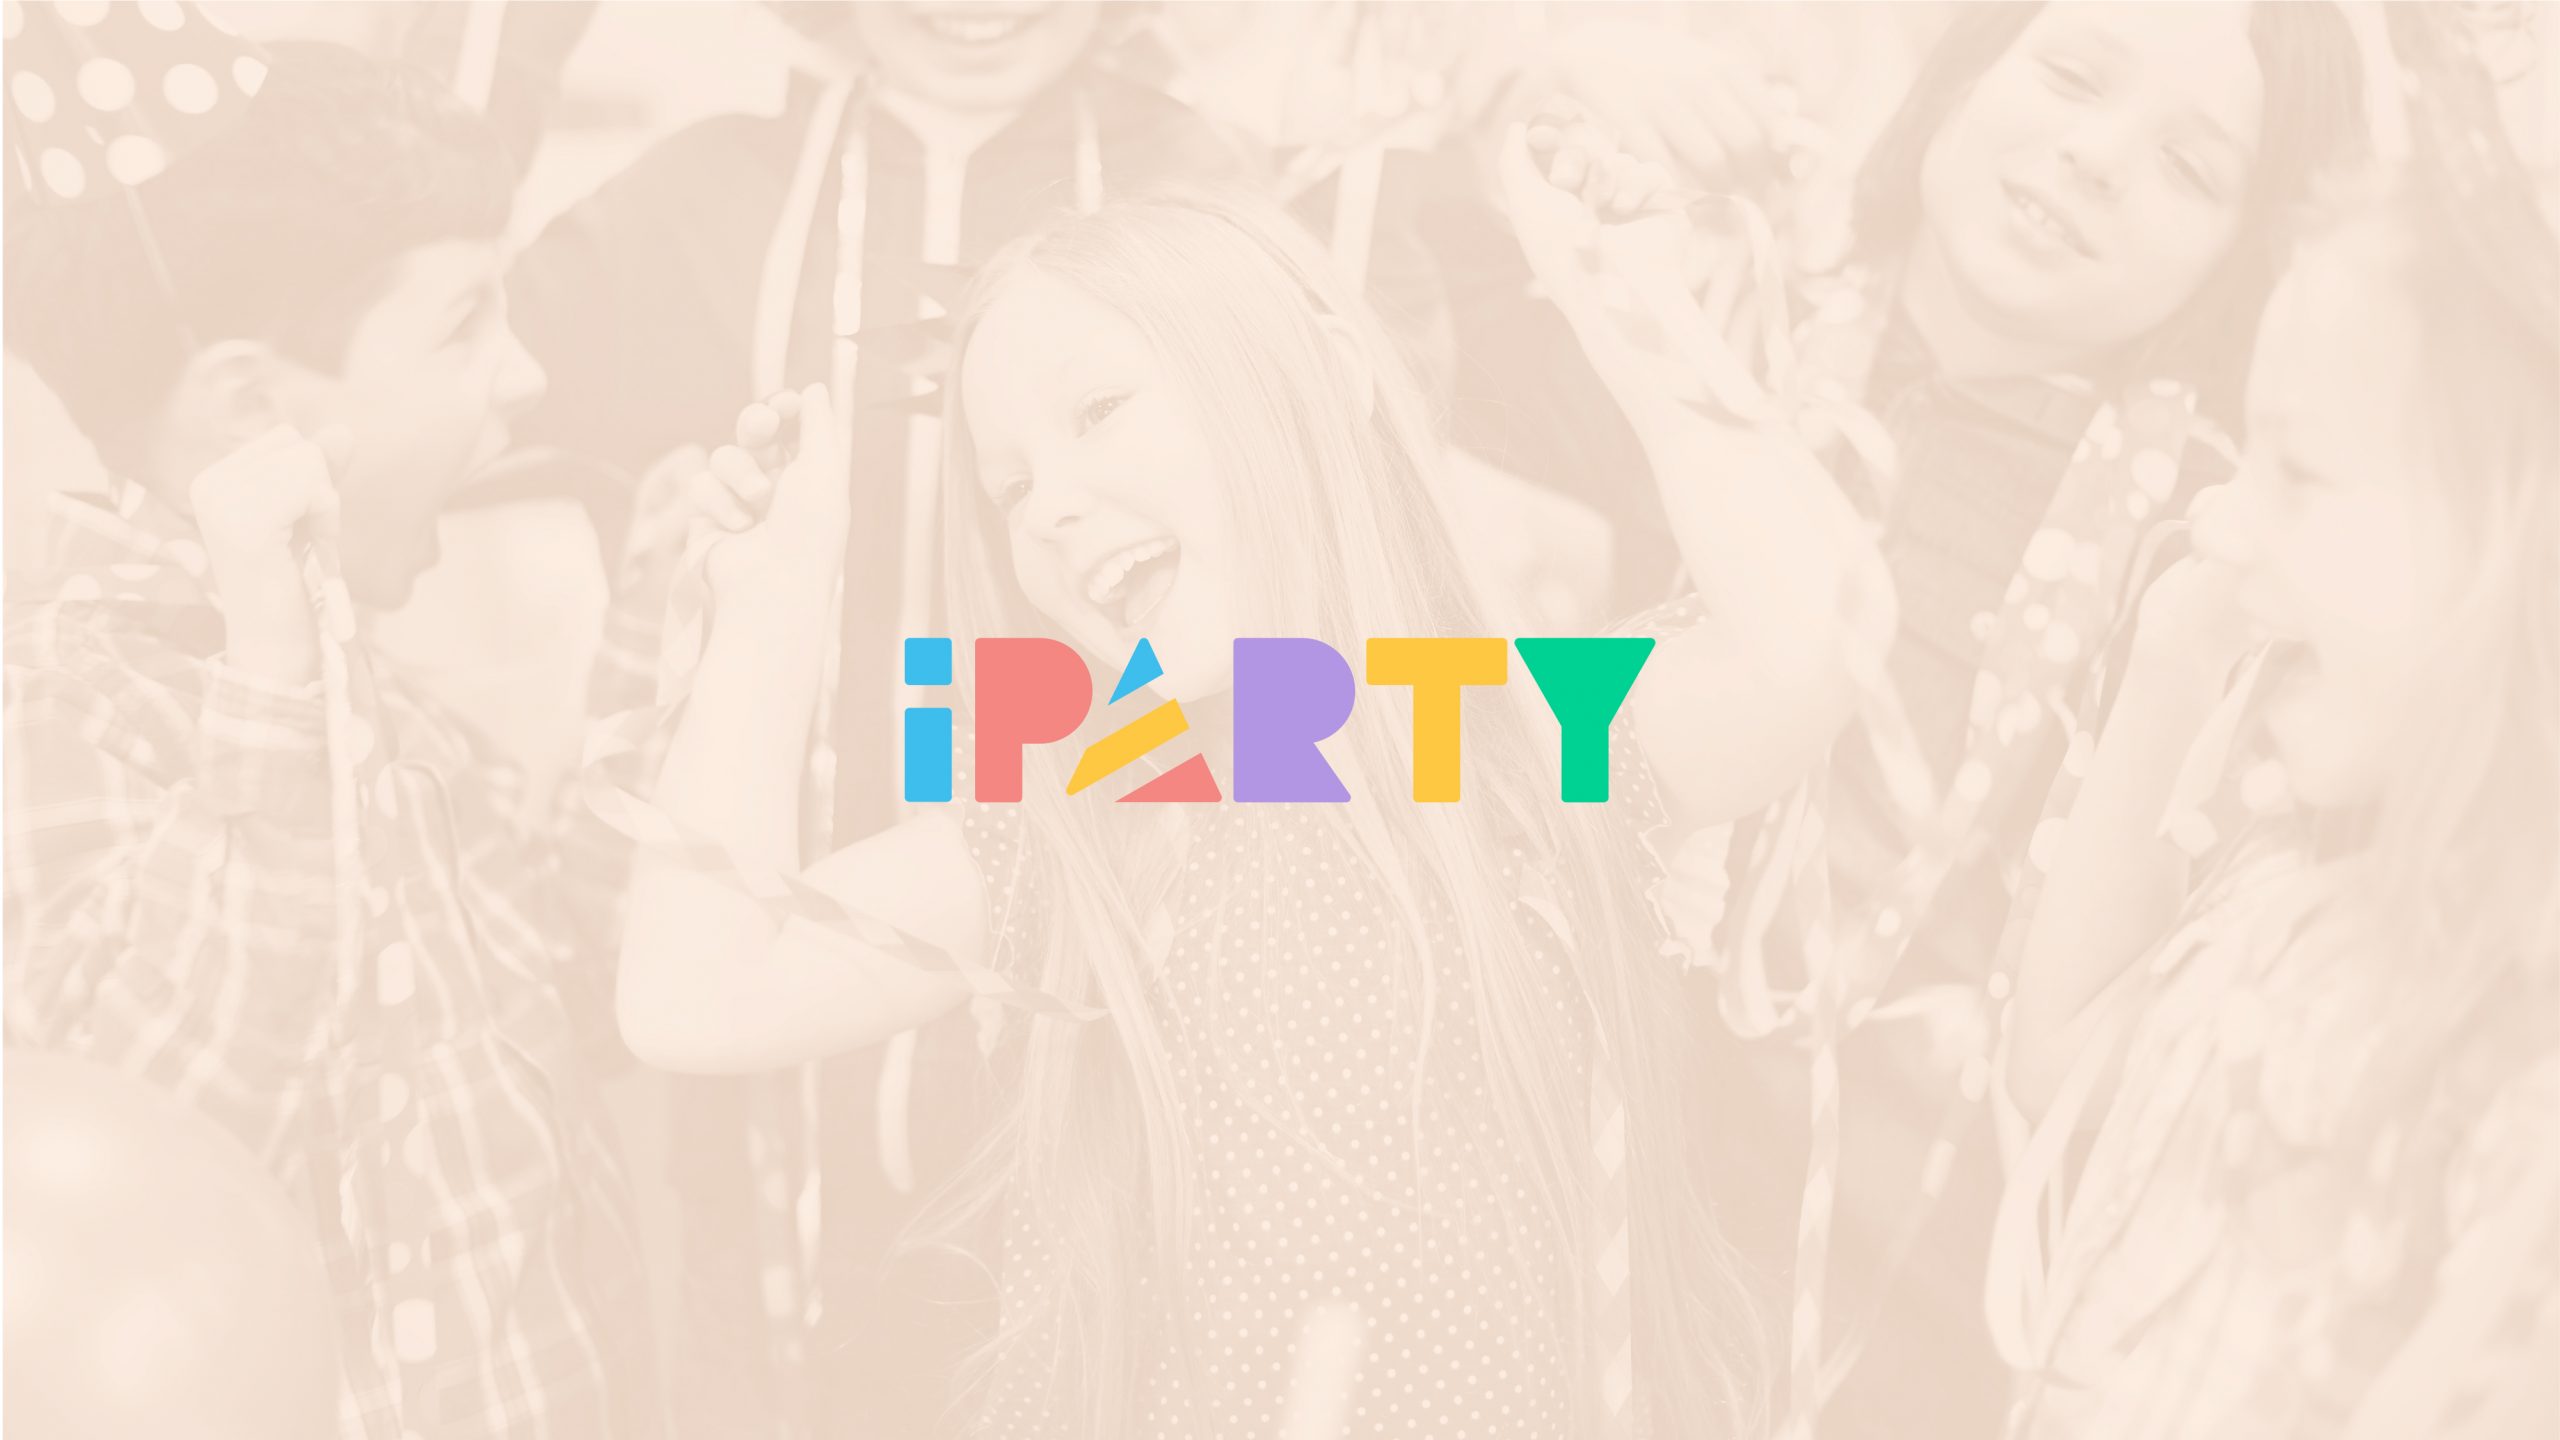 iPARTY